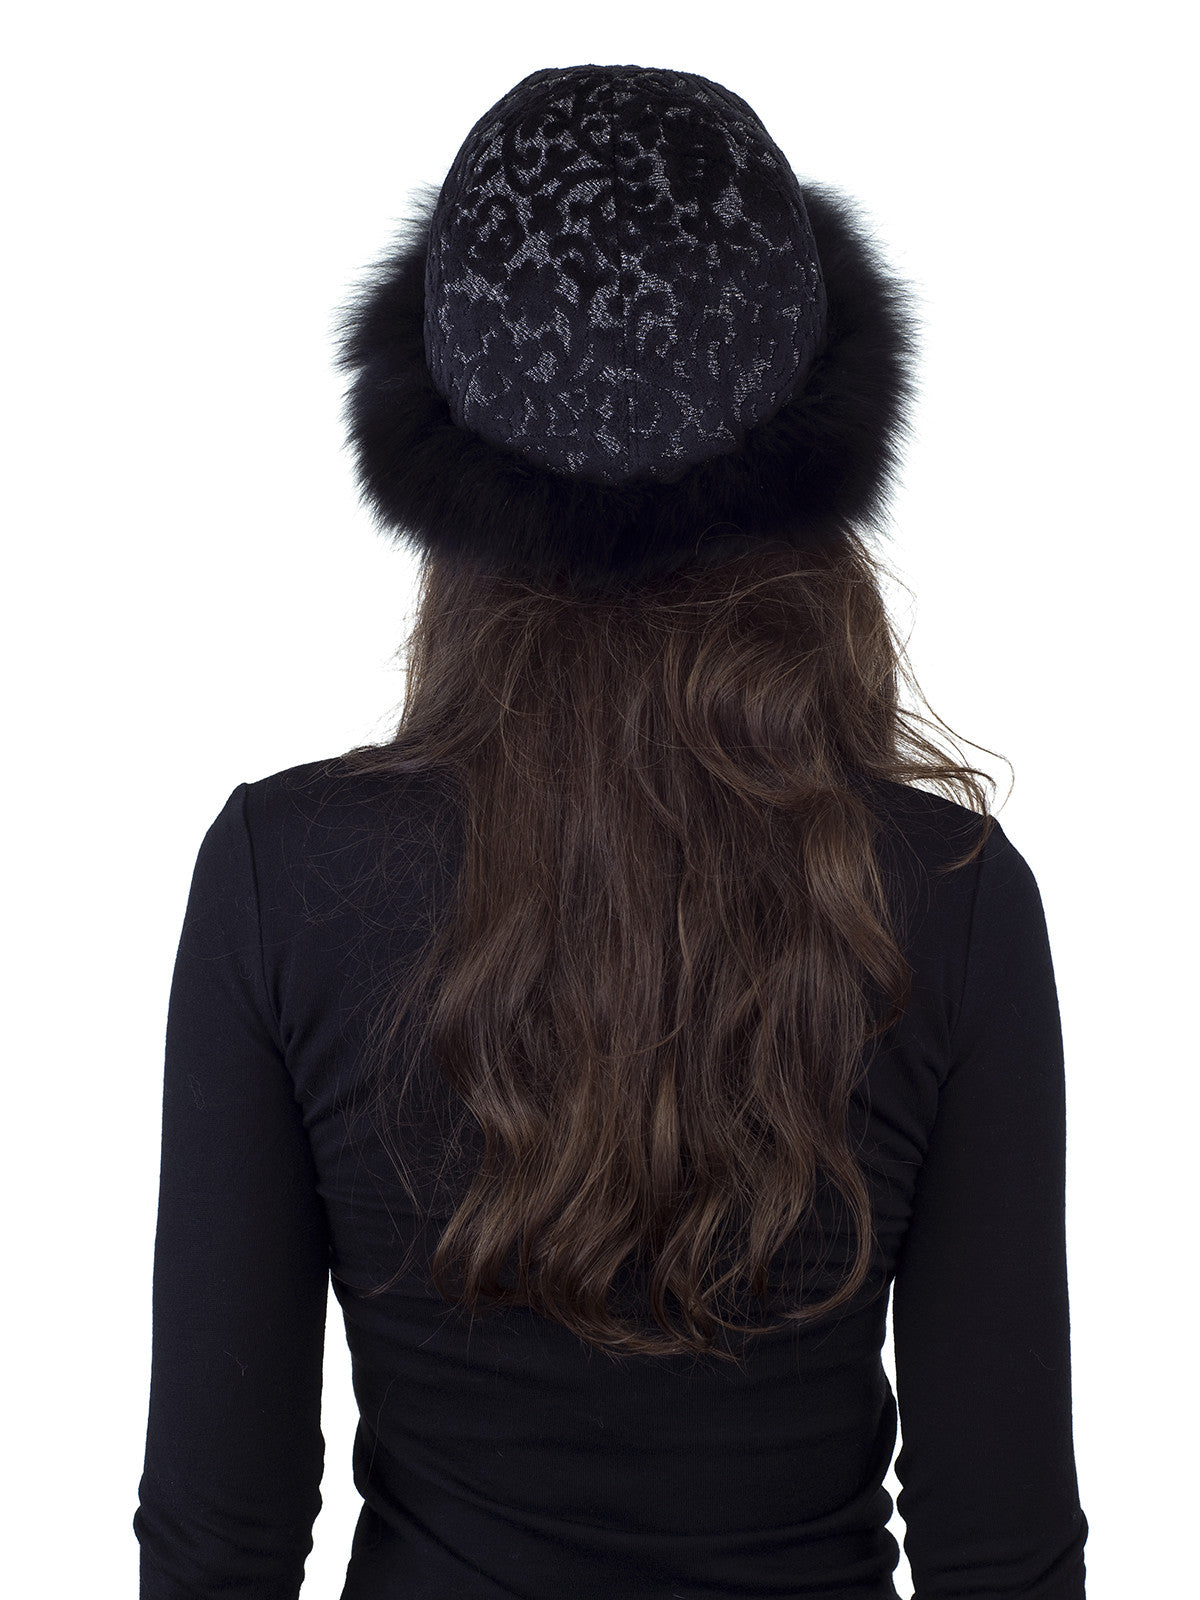 Black Fox Hat with Italian Black and Silver Fabric